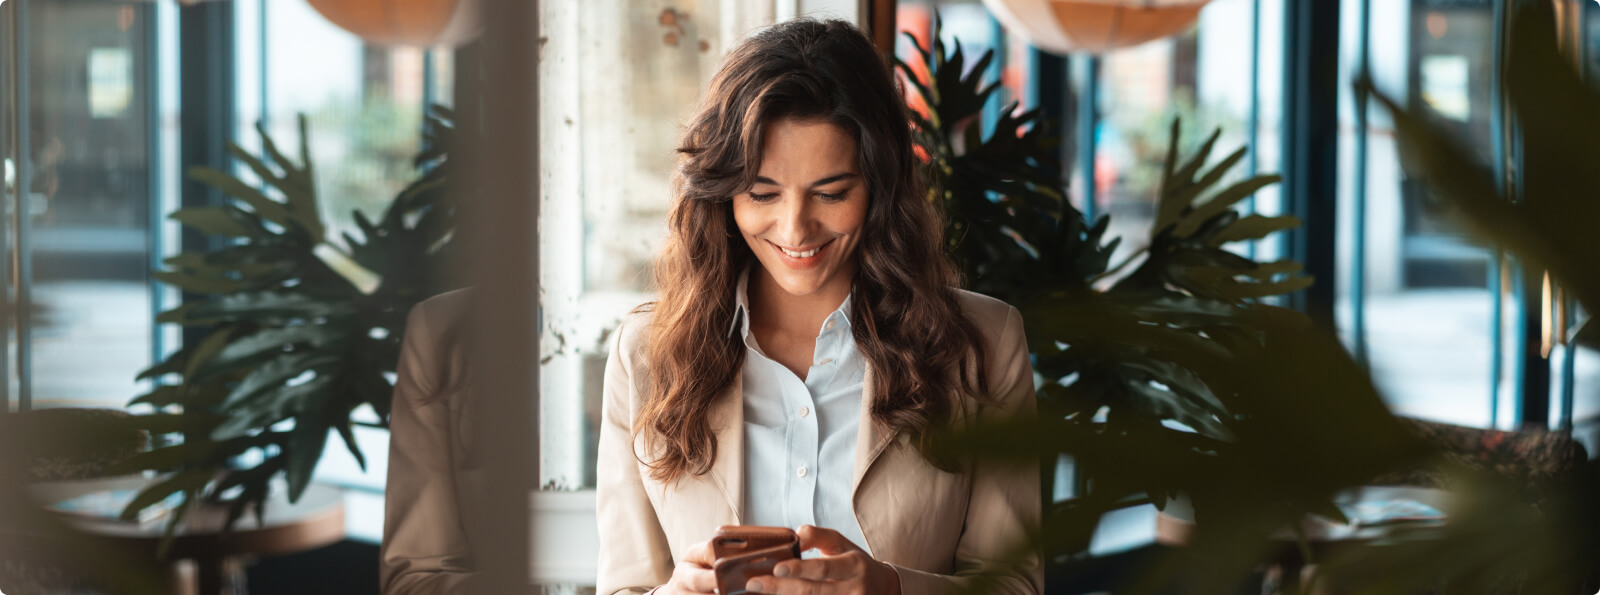 Woman in profession attire smiling while looking at smart phone